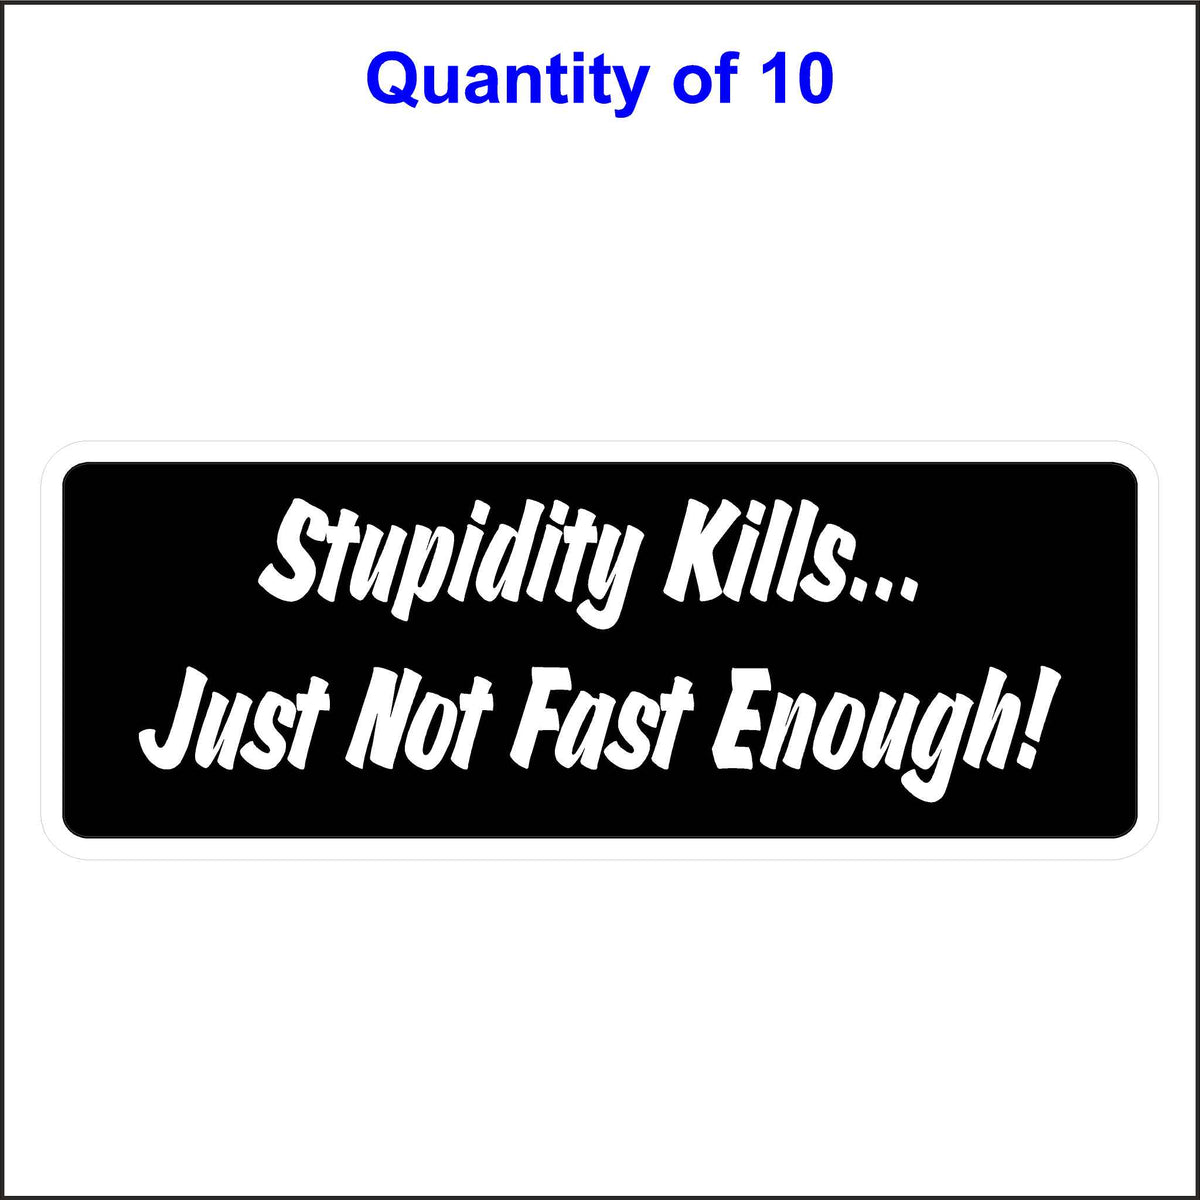 Stupidity Kills Just Not Fast Enough Stickers. 10 Quantity.